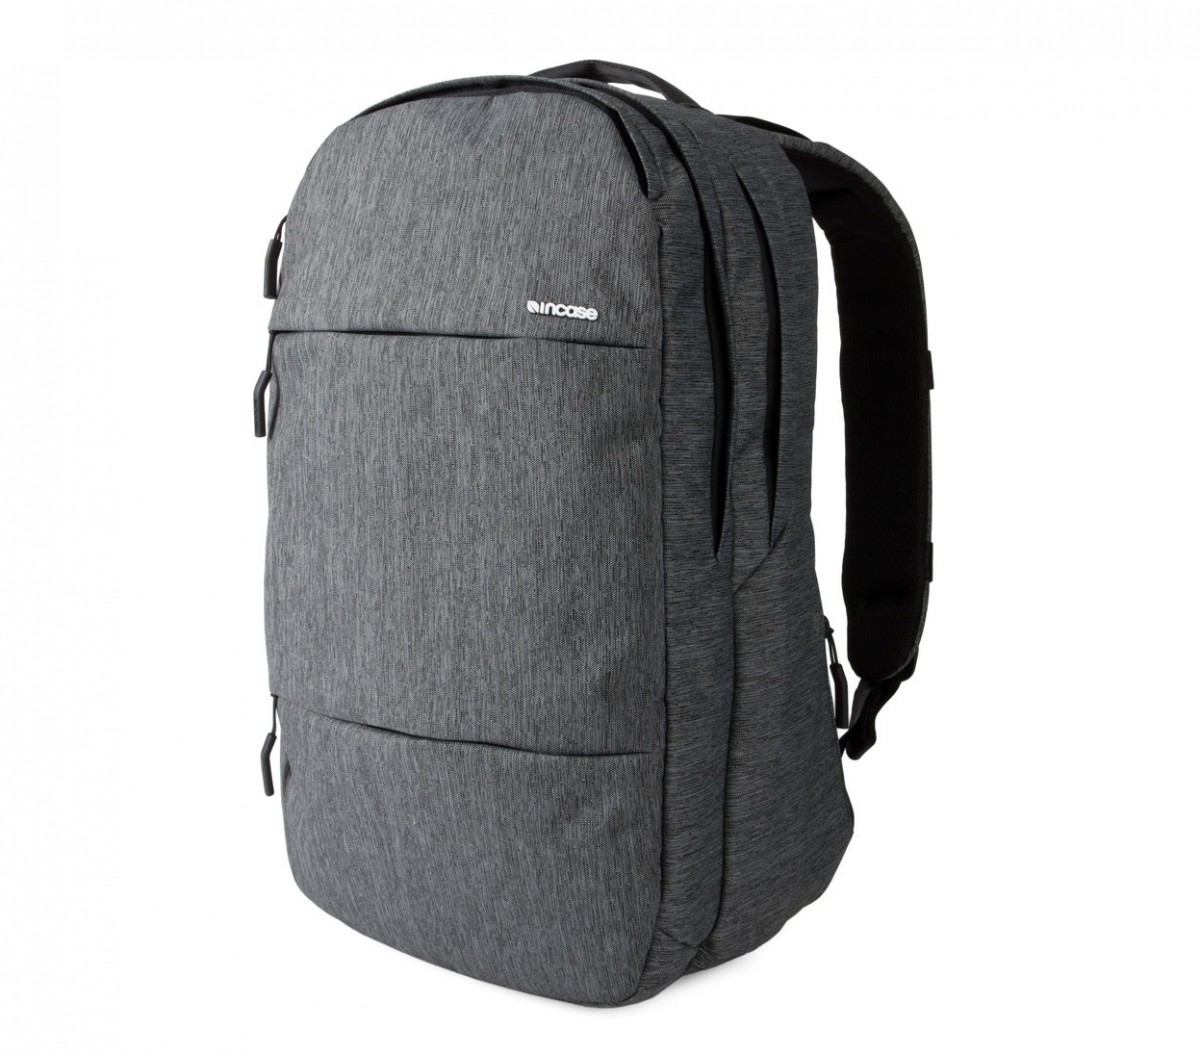 incase city laptop backpack review